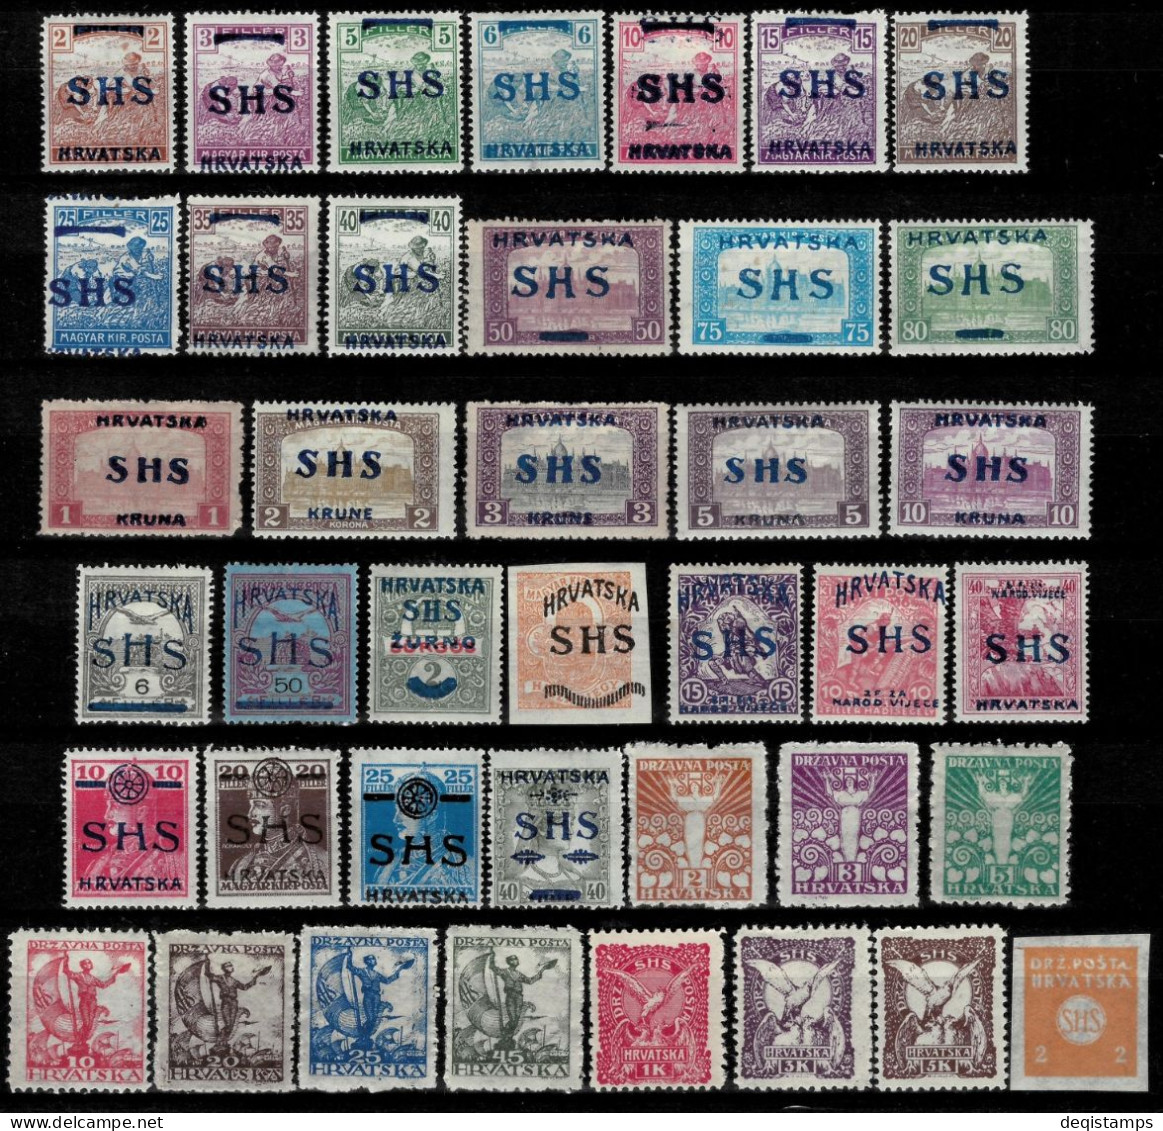 SHS - Croatia Stamps 1918/19  Hungary Stamps Overprinted  MH Sets - Nuovi